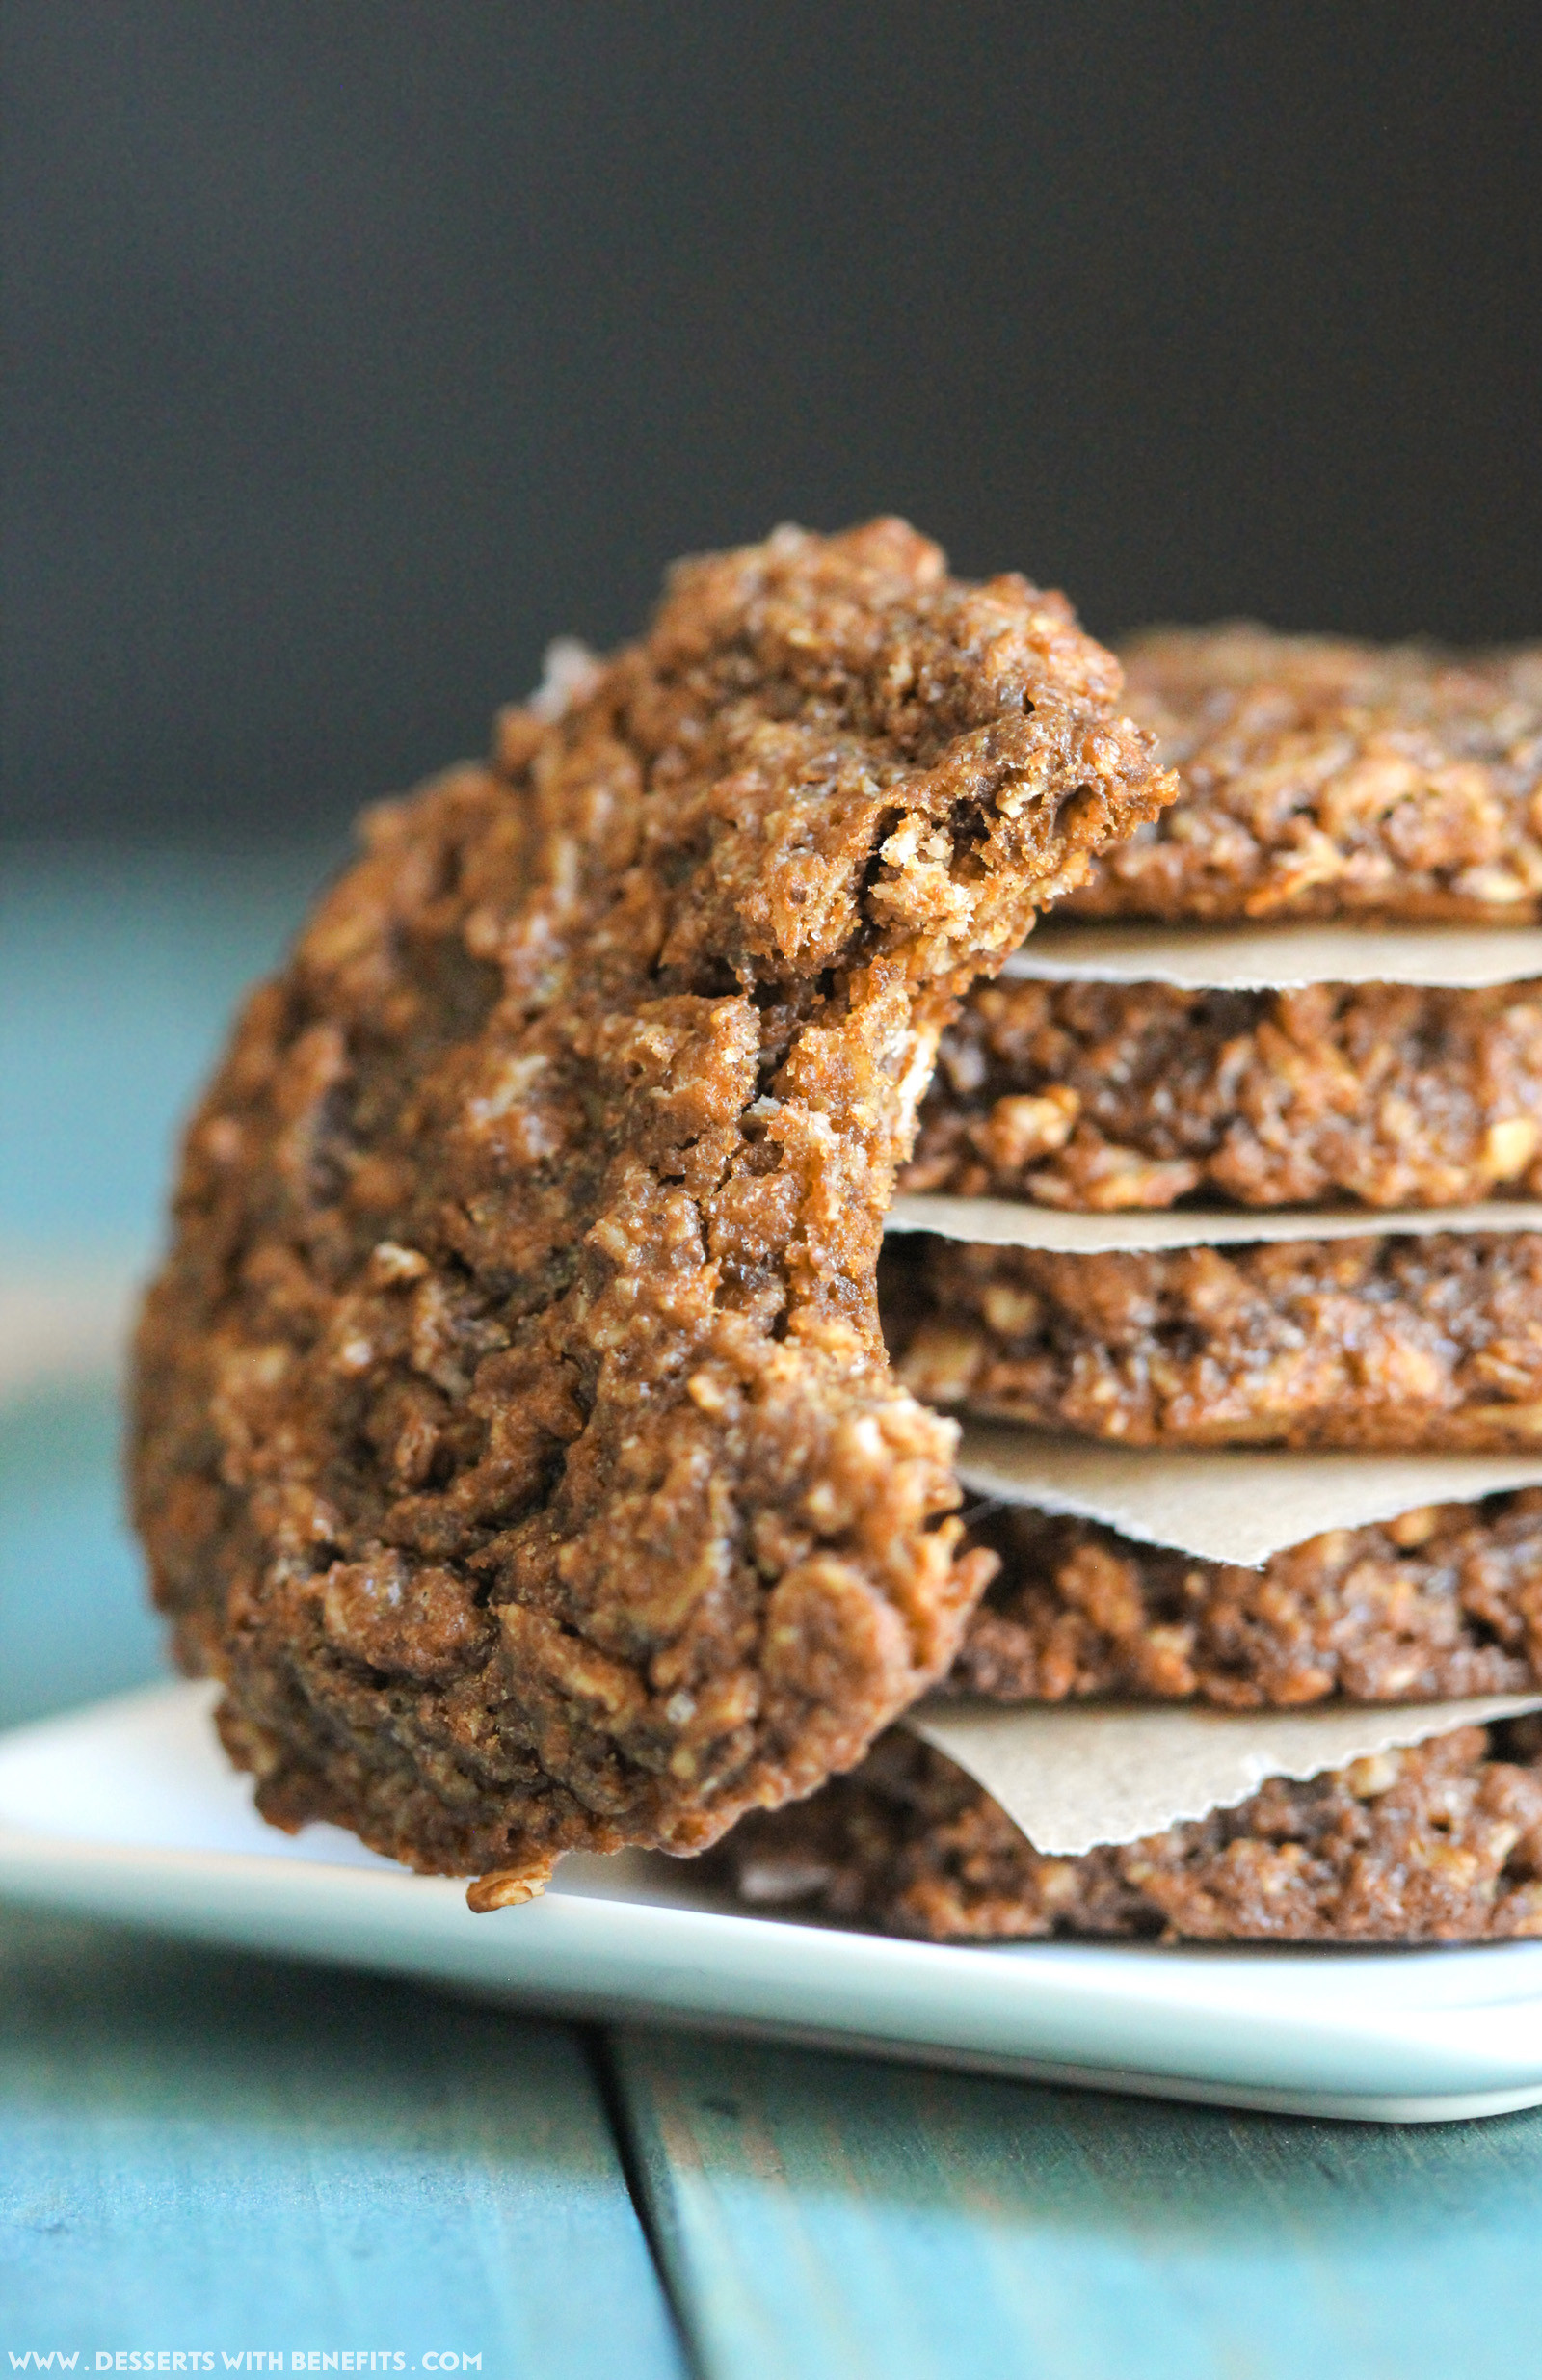 Healthy Peanut Butter Oatmeal Cookies
 Healthy Chewy Peanut Butter Oatmeal Cookies recipe gluten